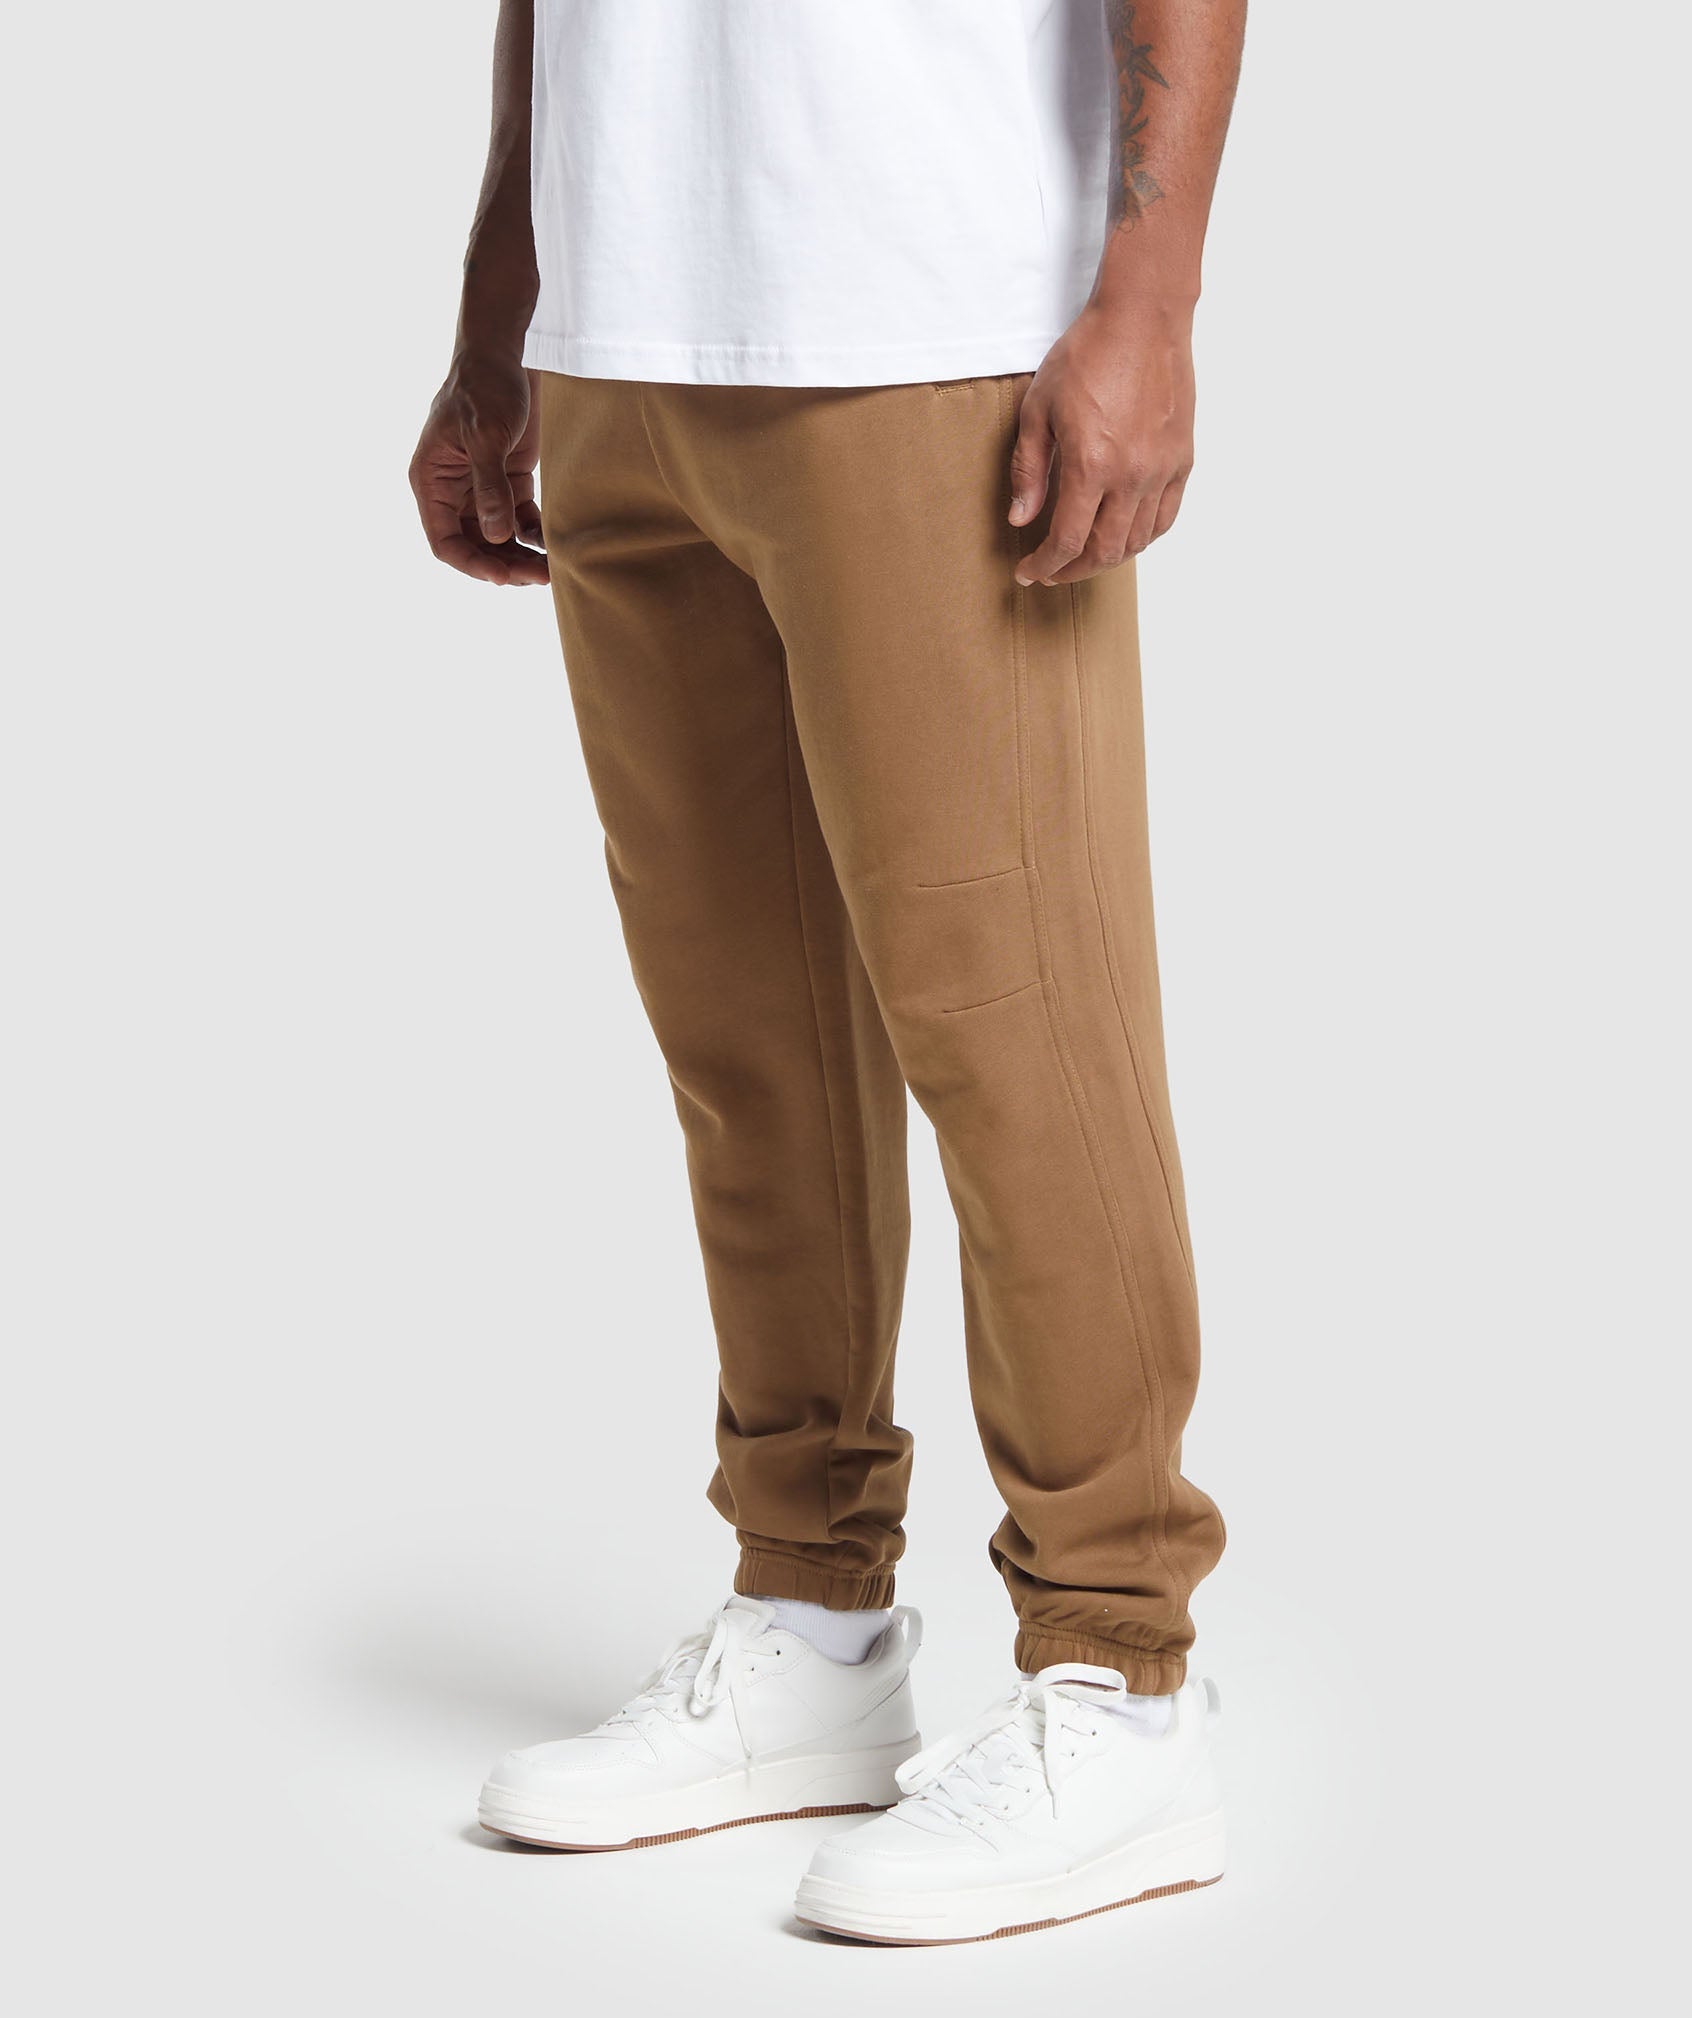 Rest Day Essentials Joggers in Caramel Brown - view 2